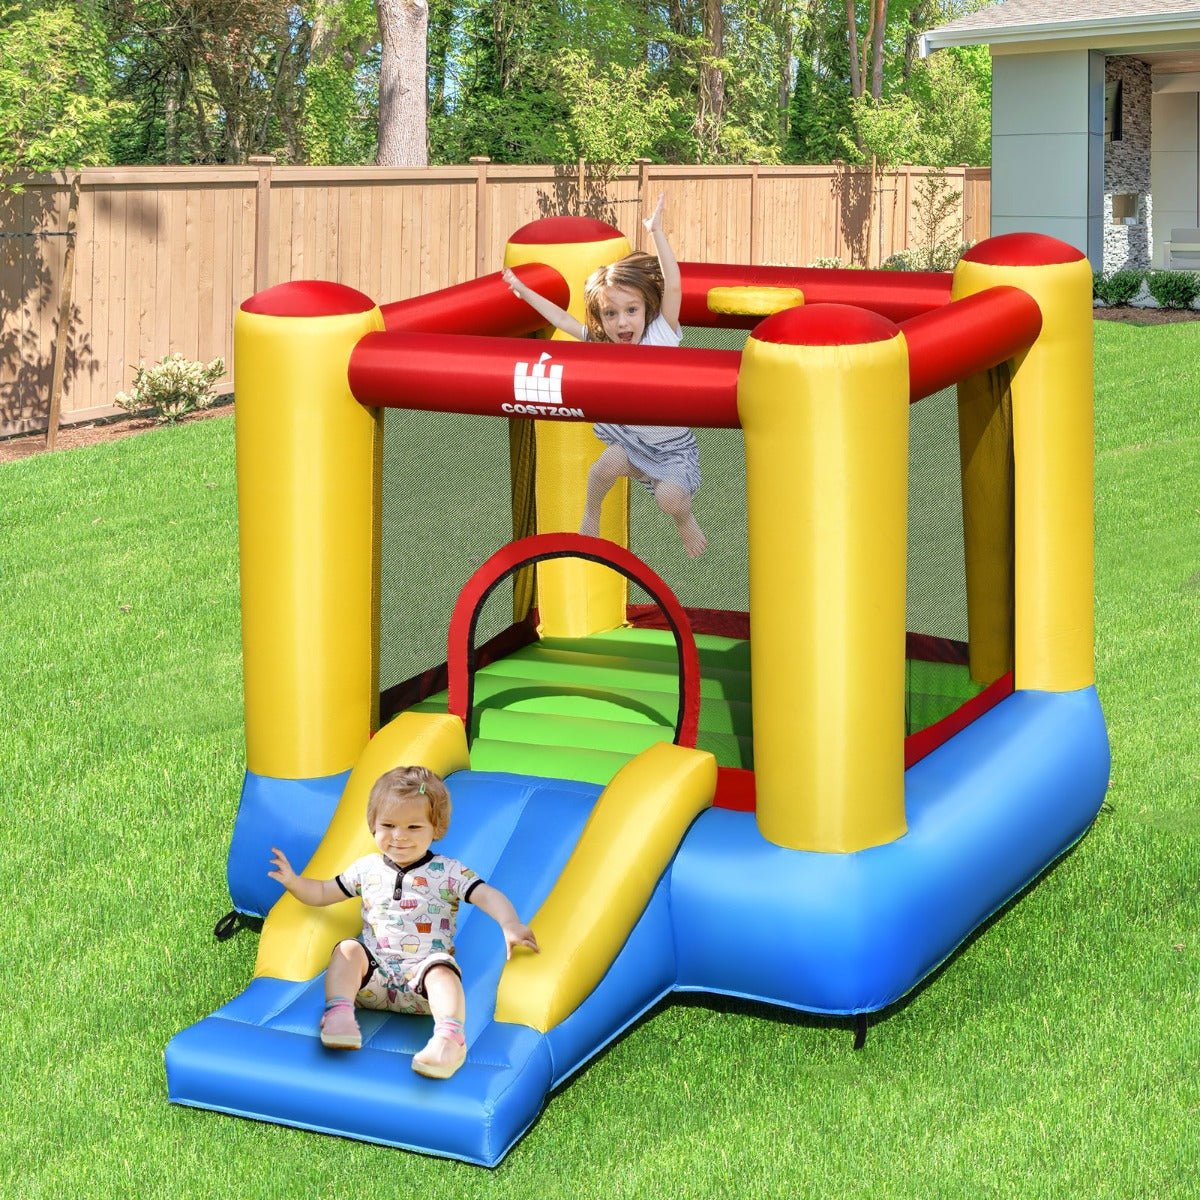 Kids Bounce House with Slide & Basketball Hoop - Inflatable Fun Zone